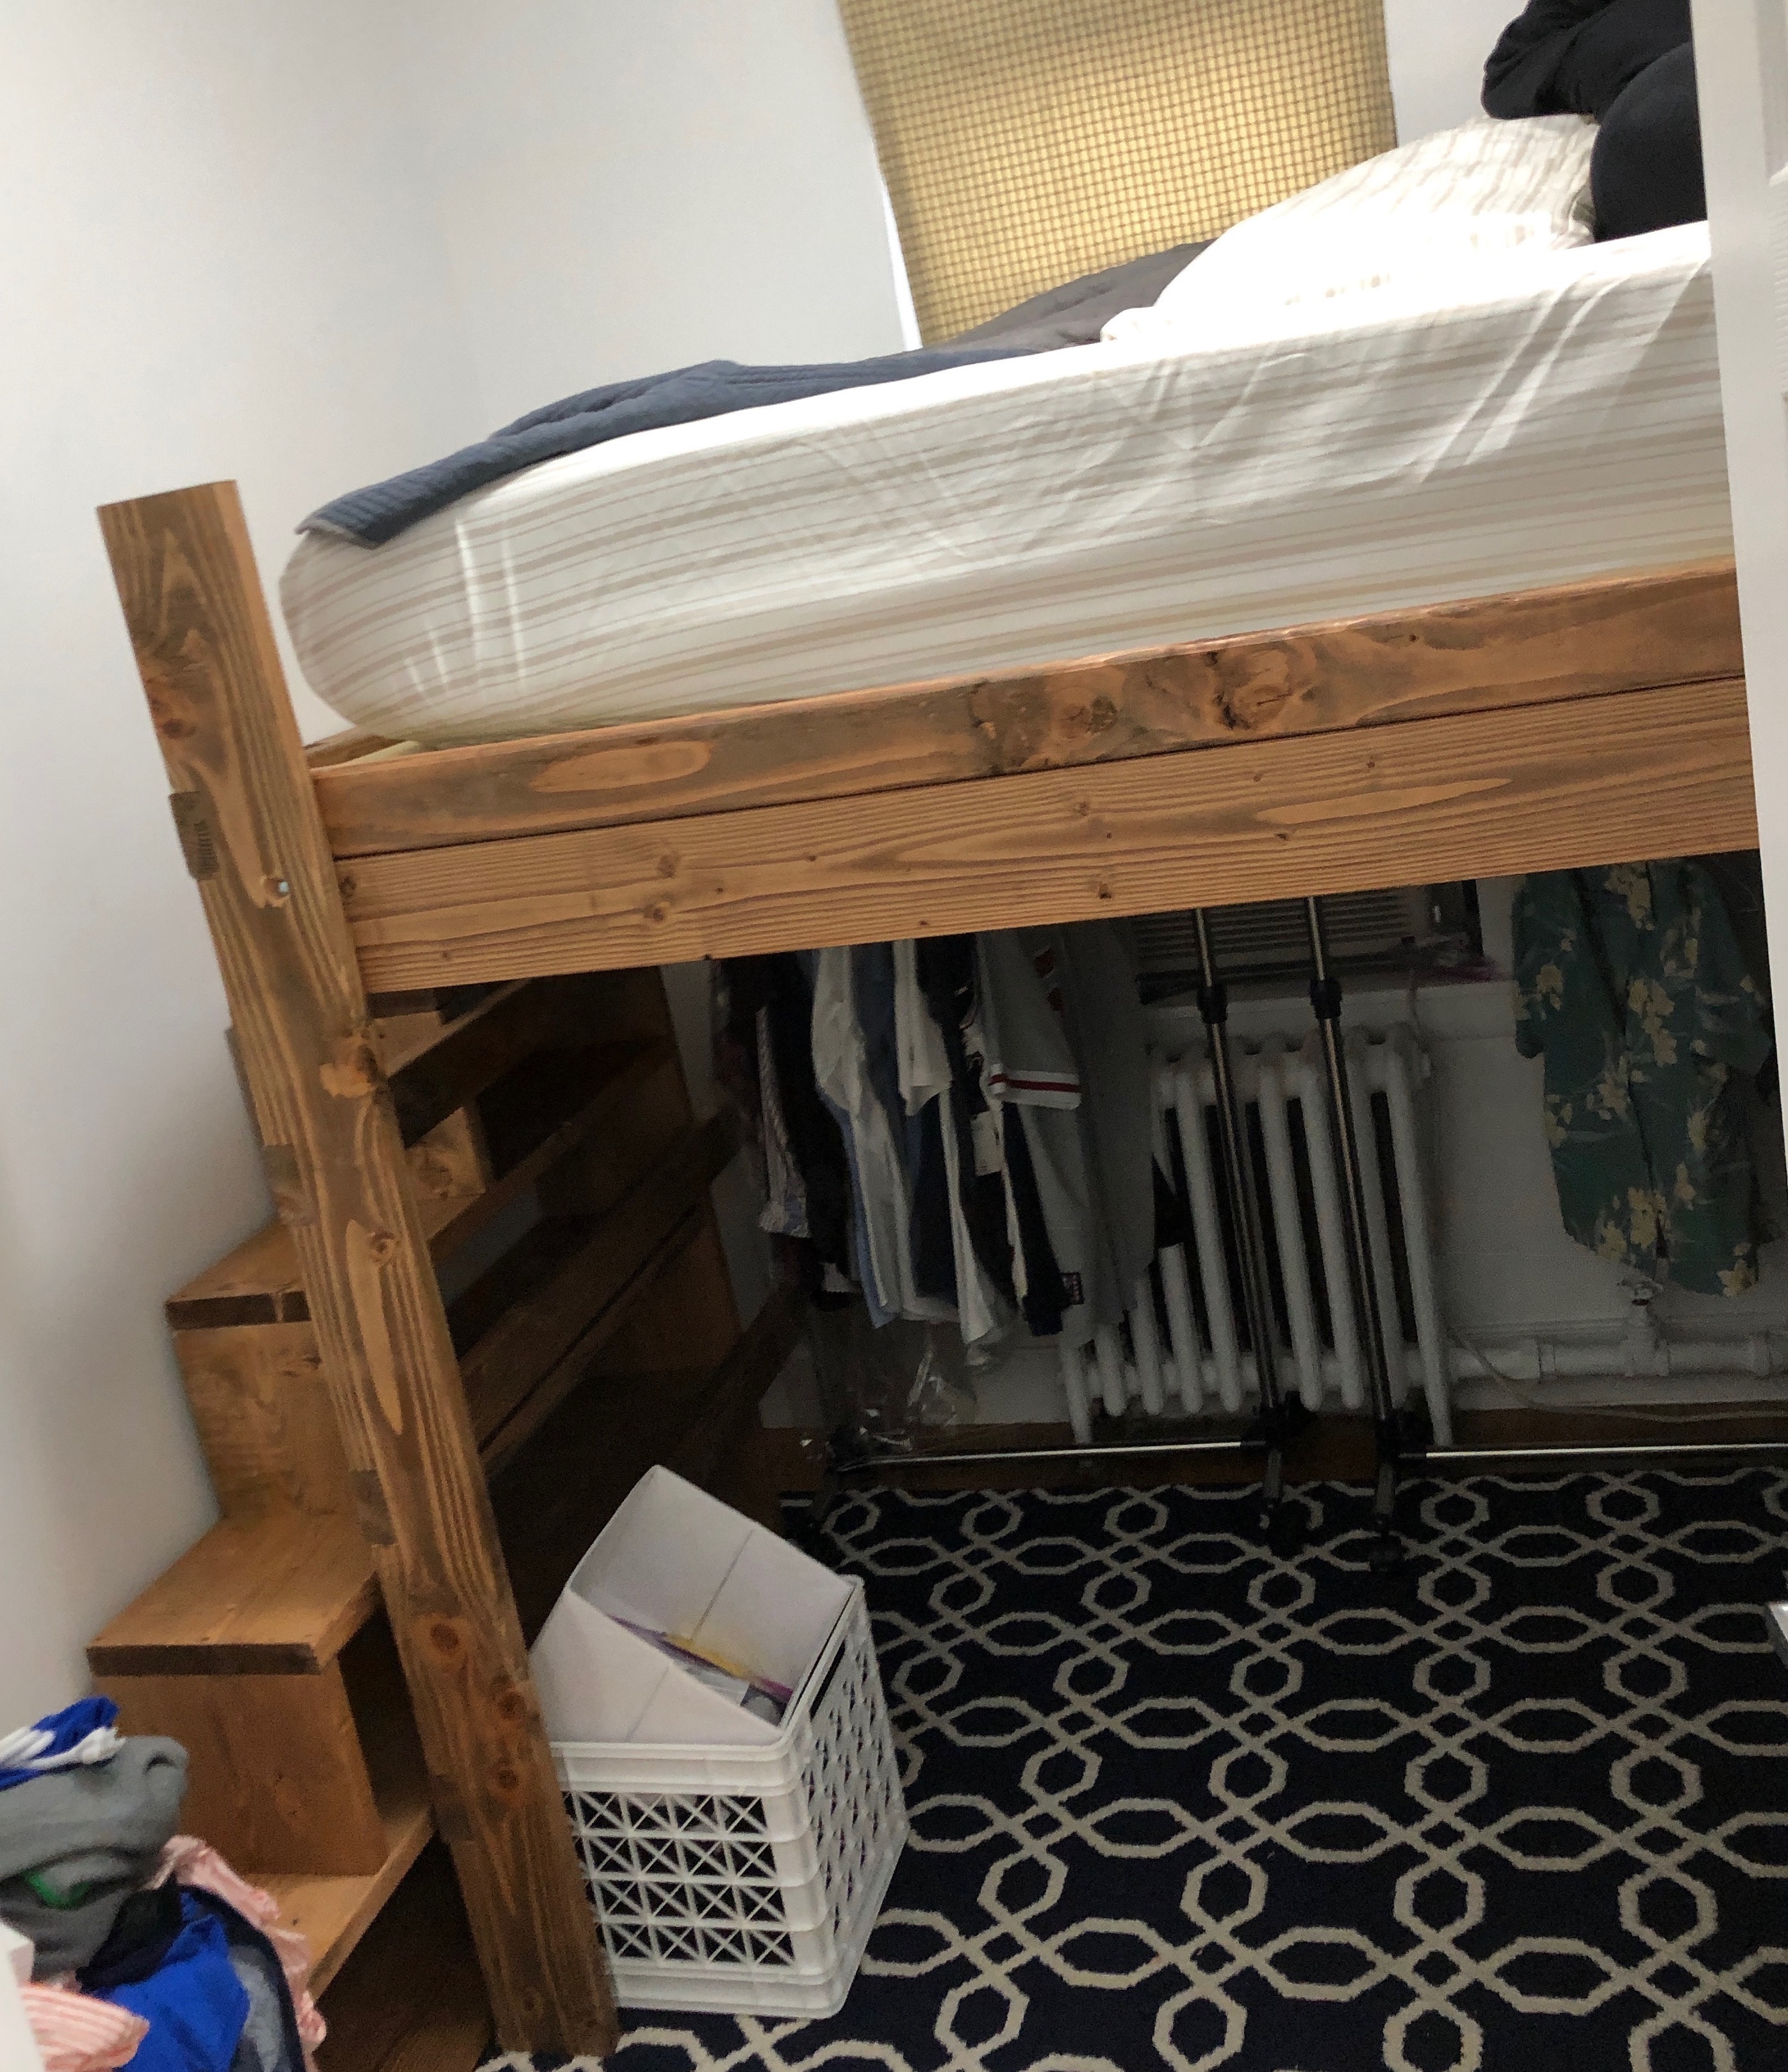 national home store loft bed